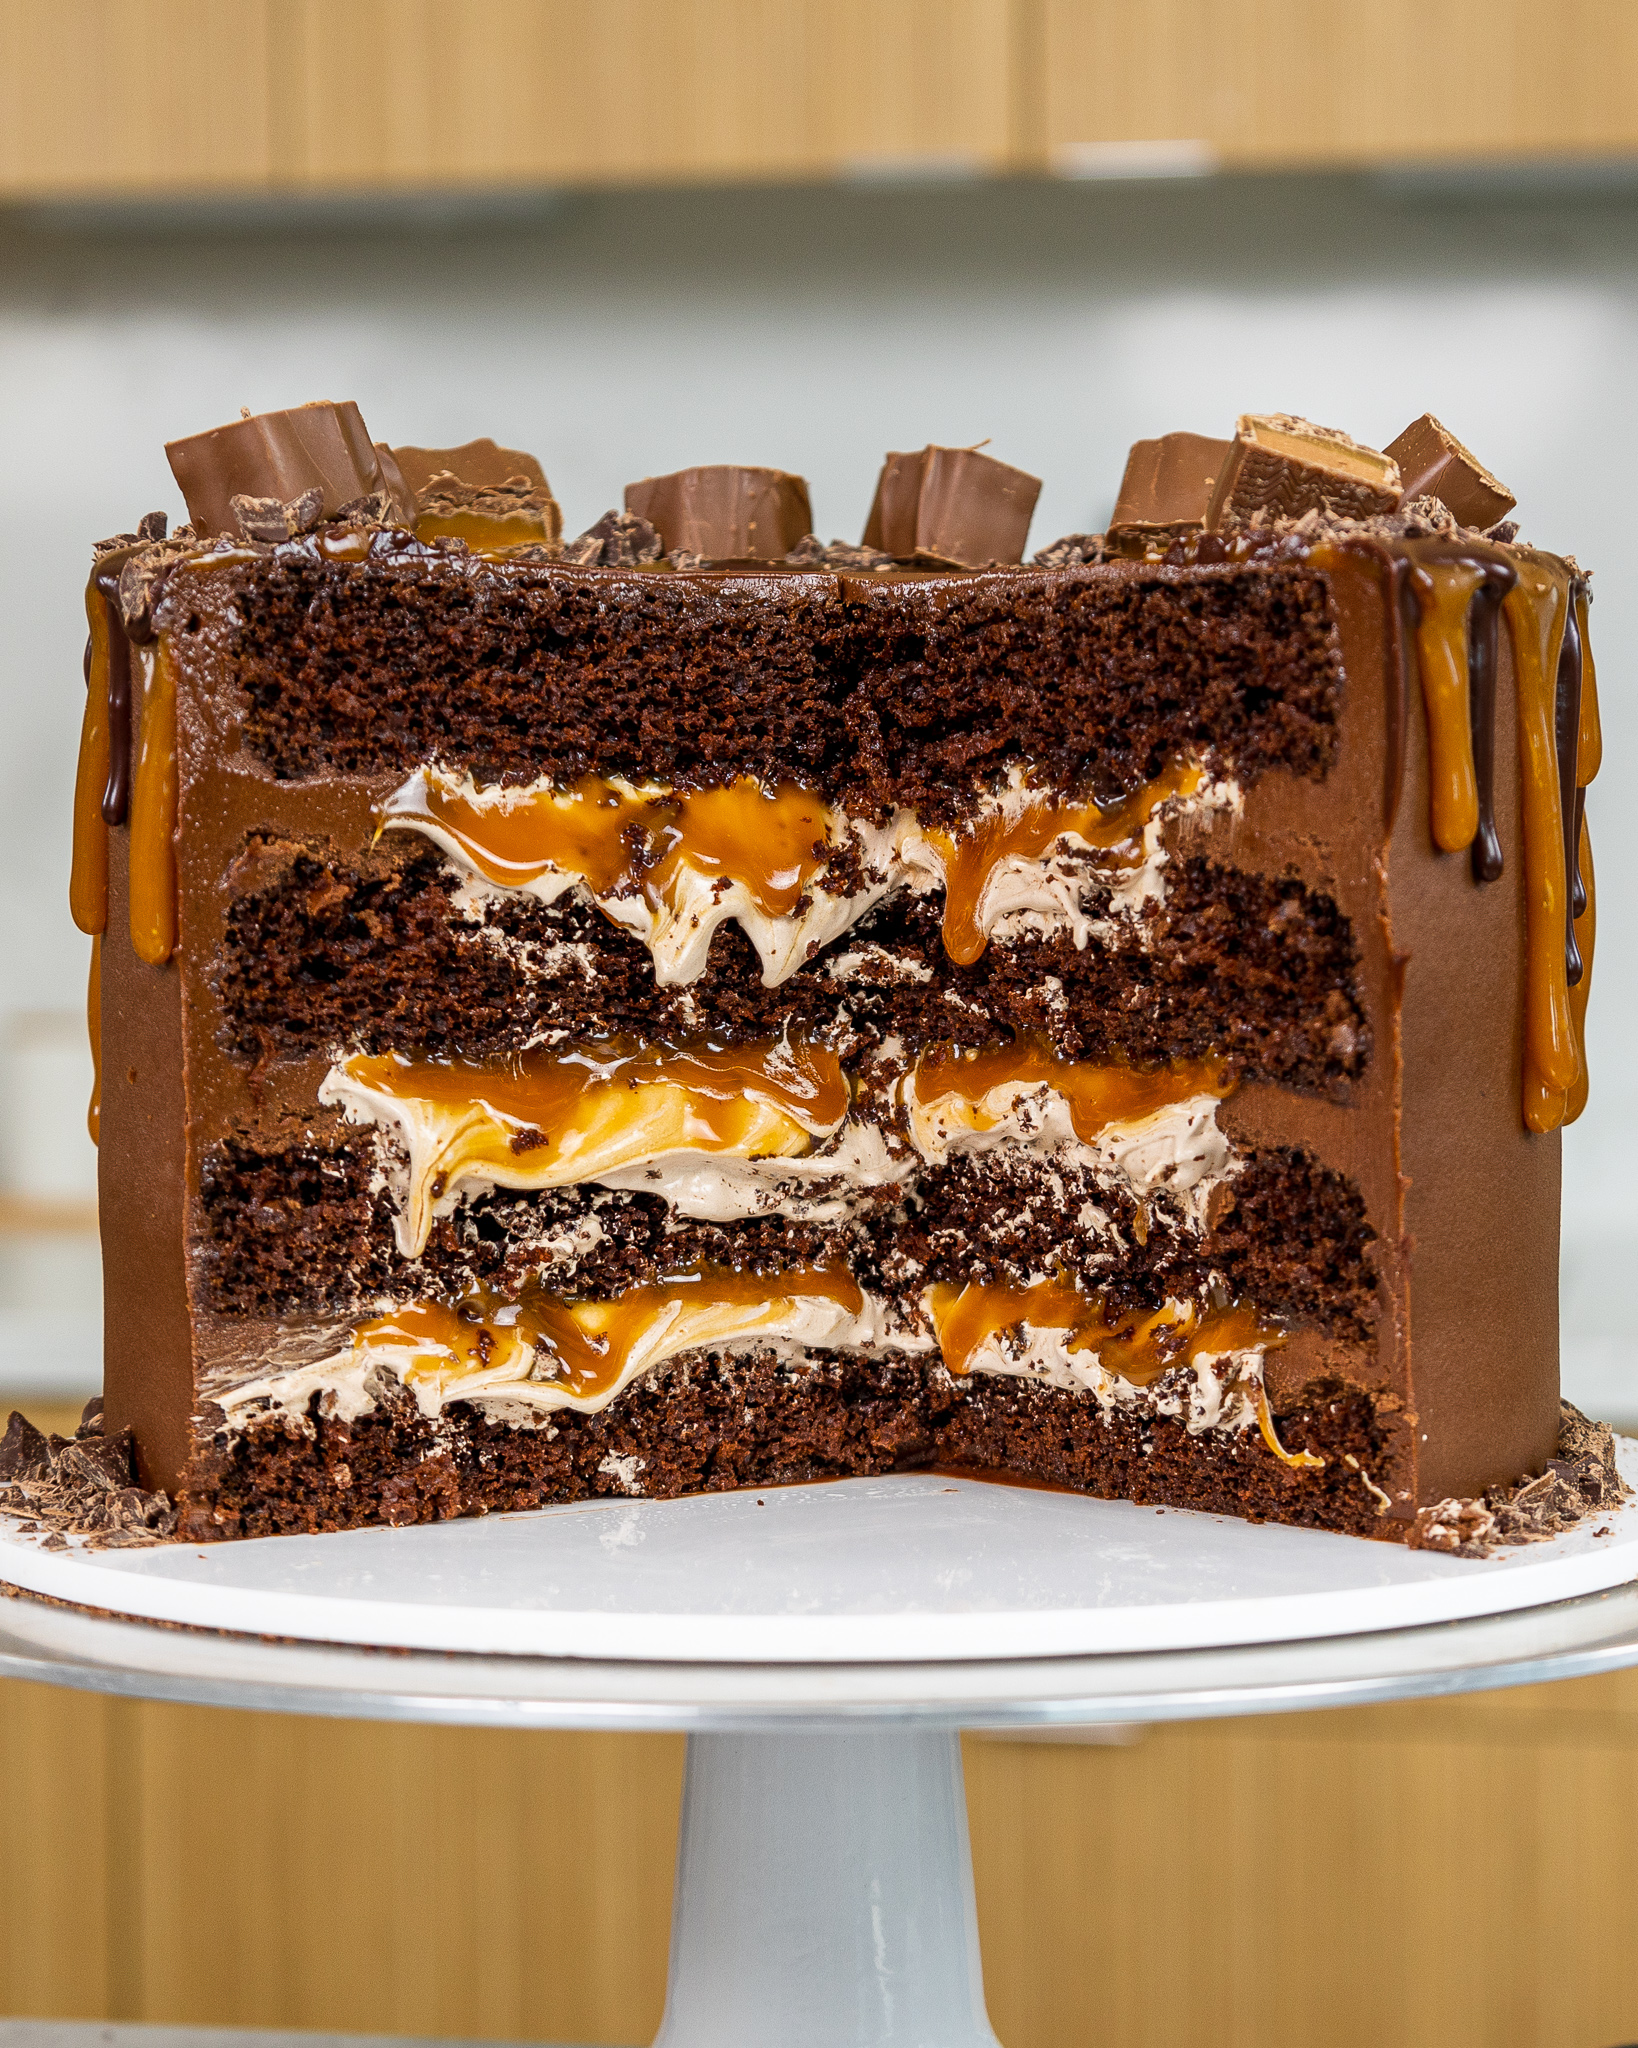 image of a milky way cake that's been cut into to show it's fluffy chocolate filling and caramel drizzle